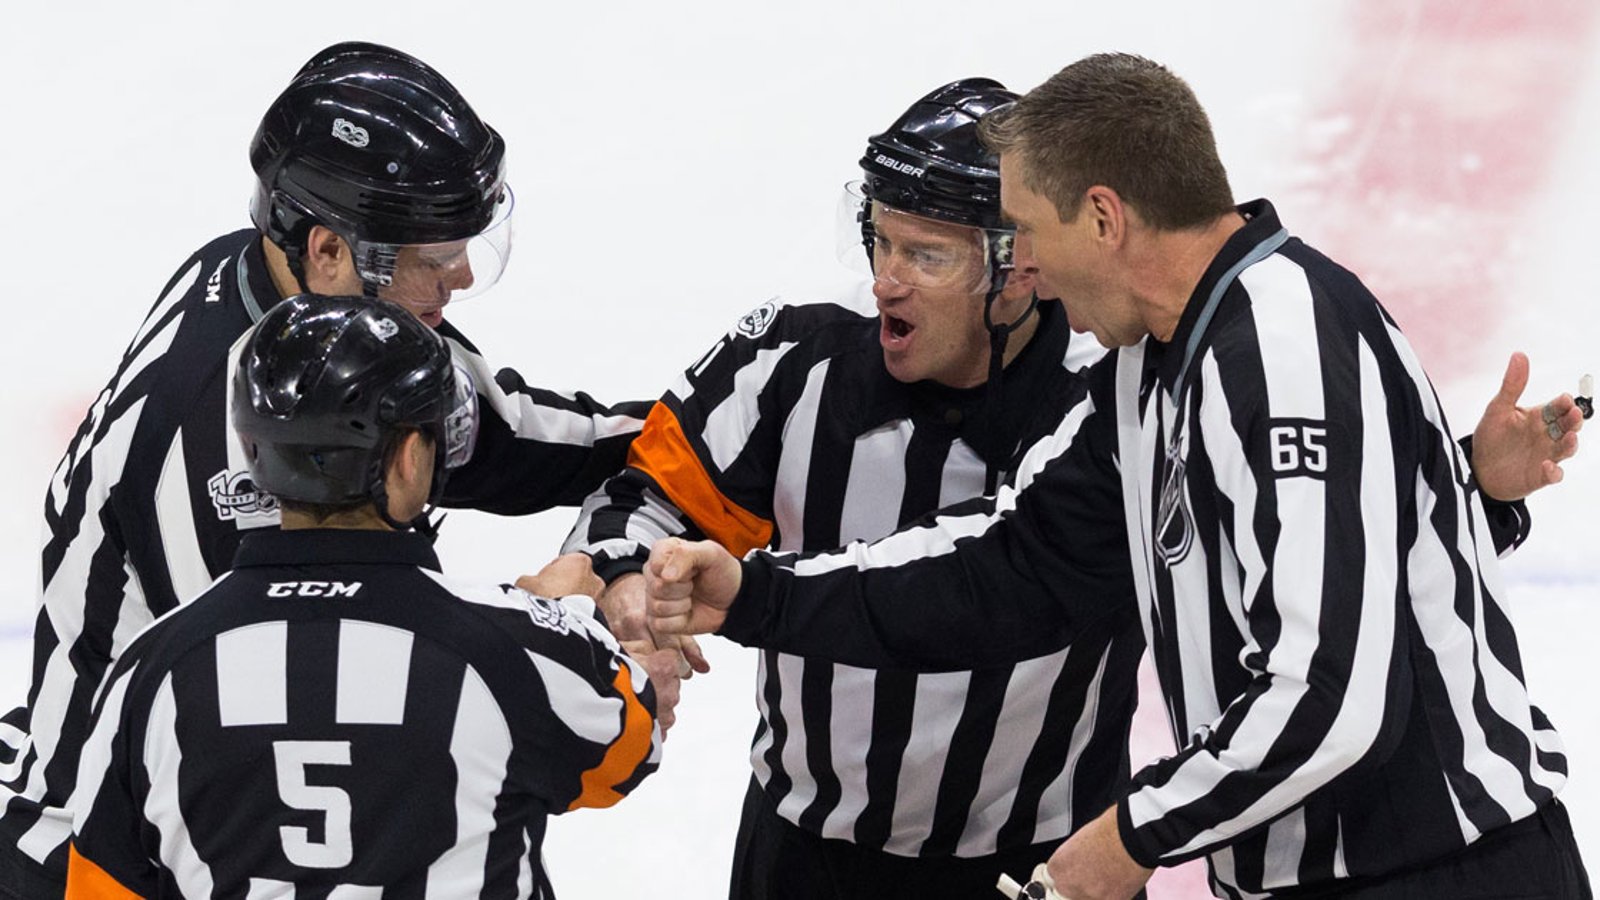 Referees' decision leaves NHL player feeling unsafe